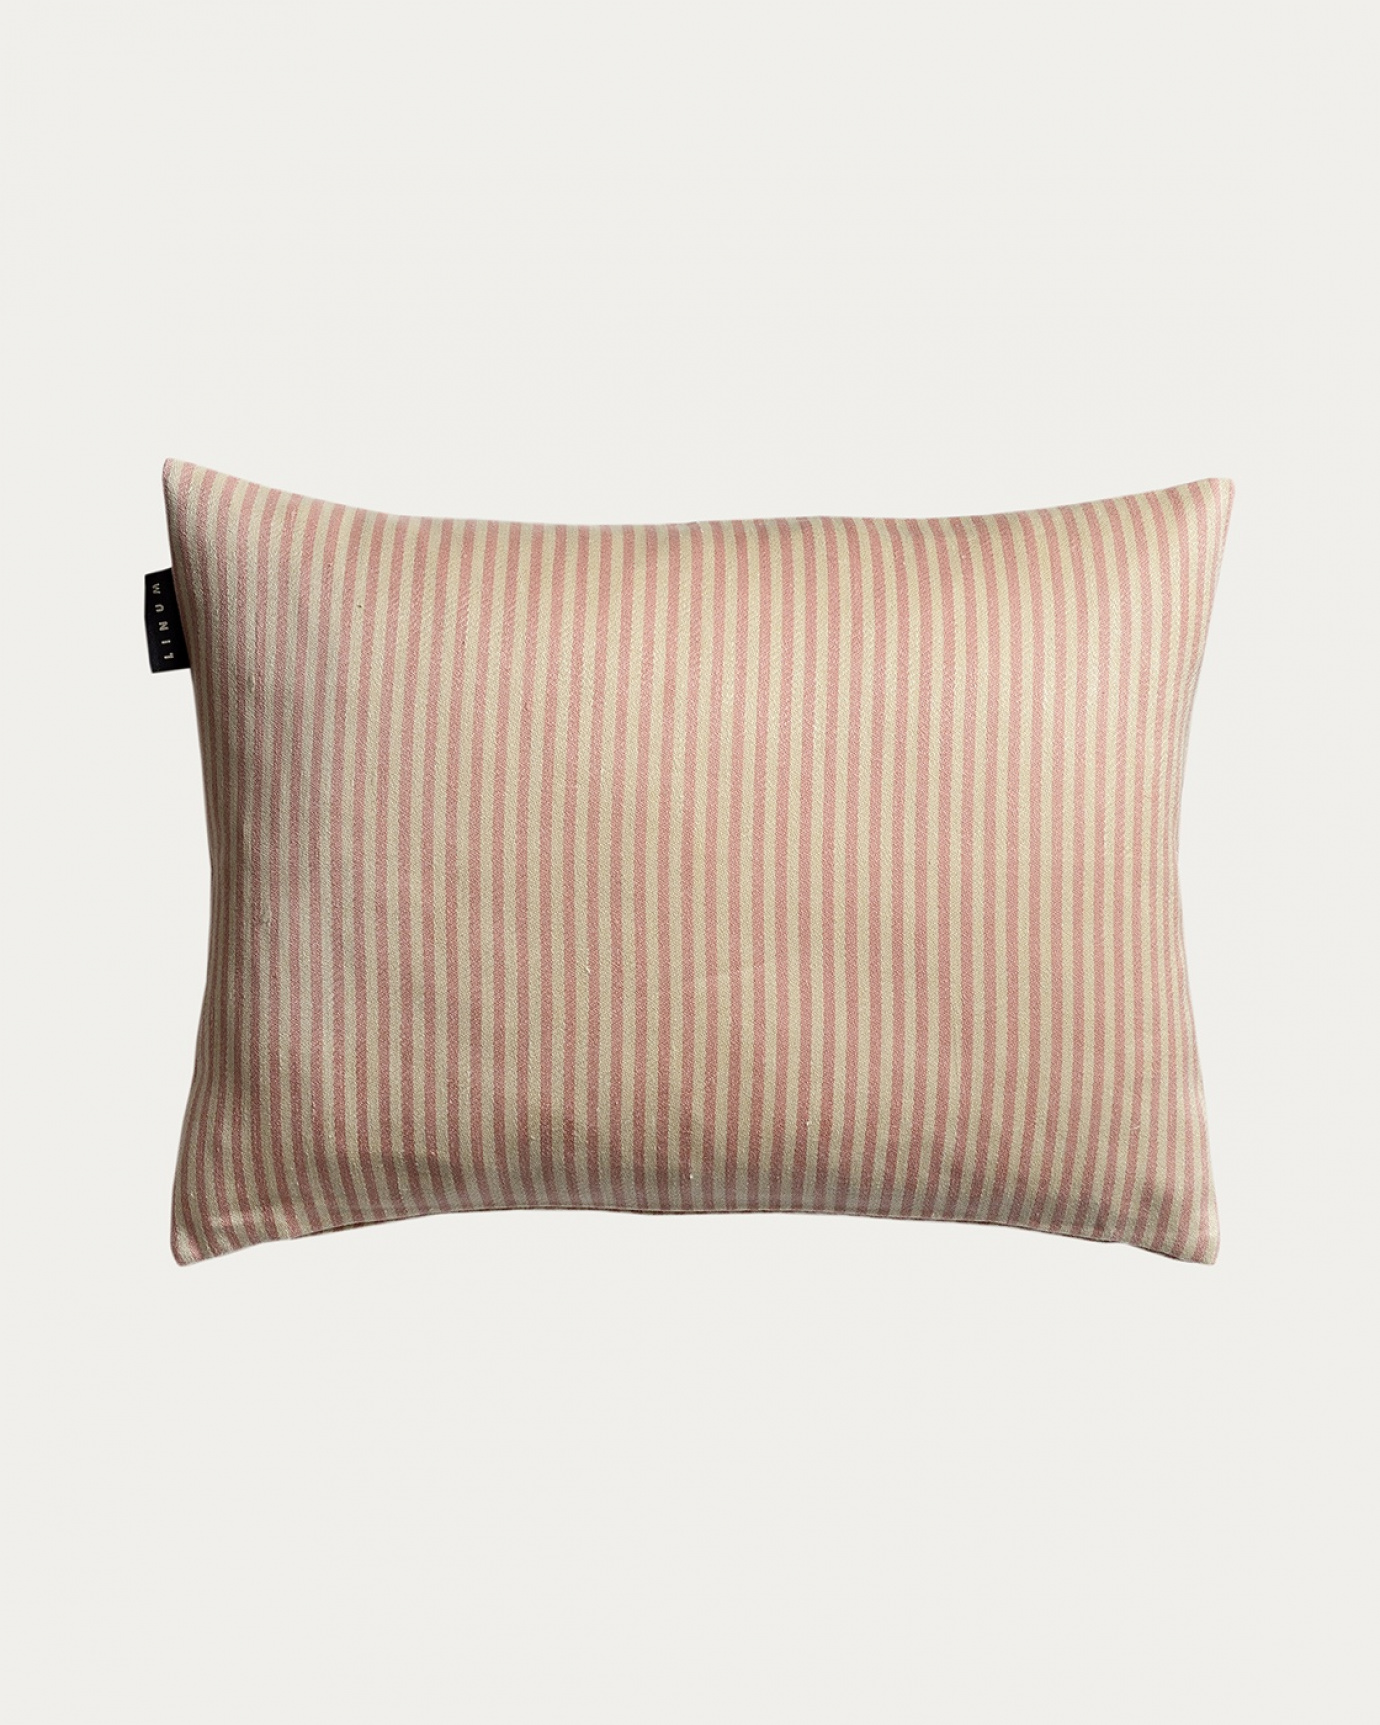 Product image misty grey pink CALCIO cushion cover with thin stripes of 77% linen and 23% cotton from LINUM DESIGN. Size 35x50 cm.